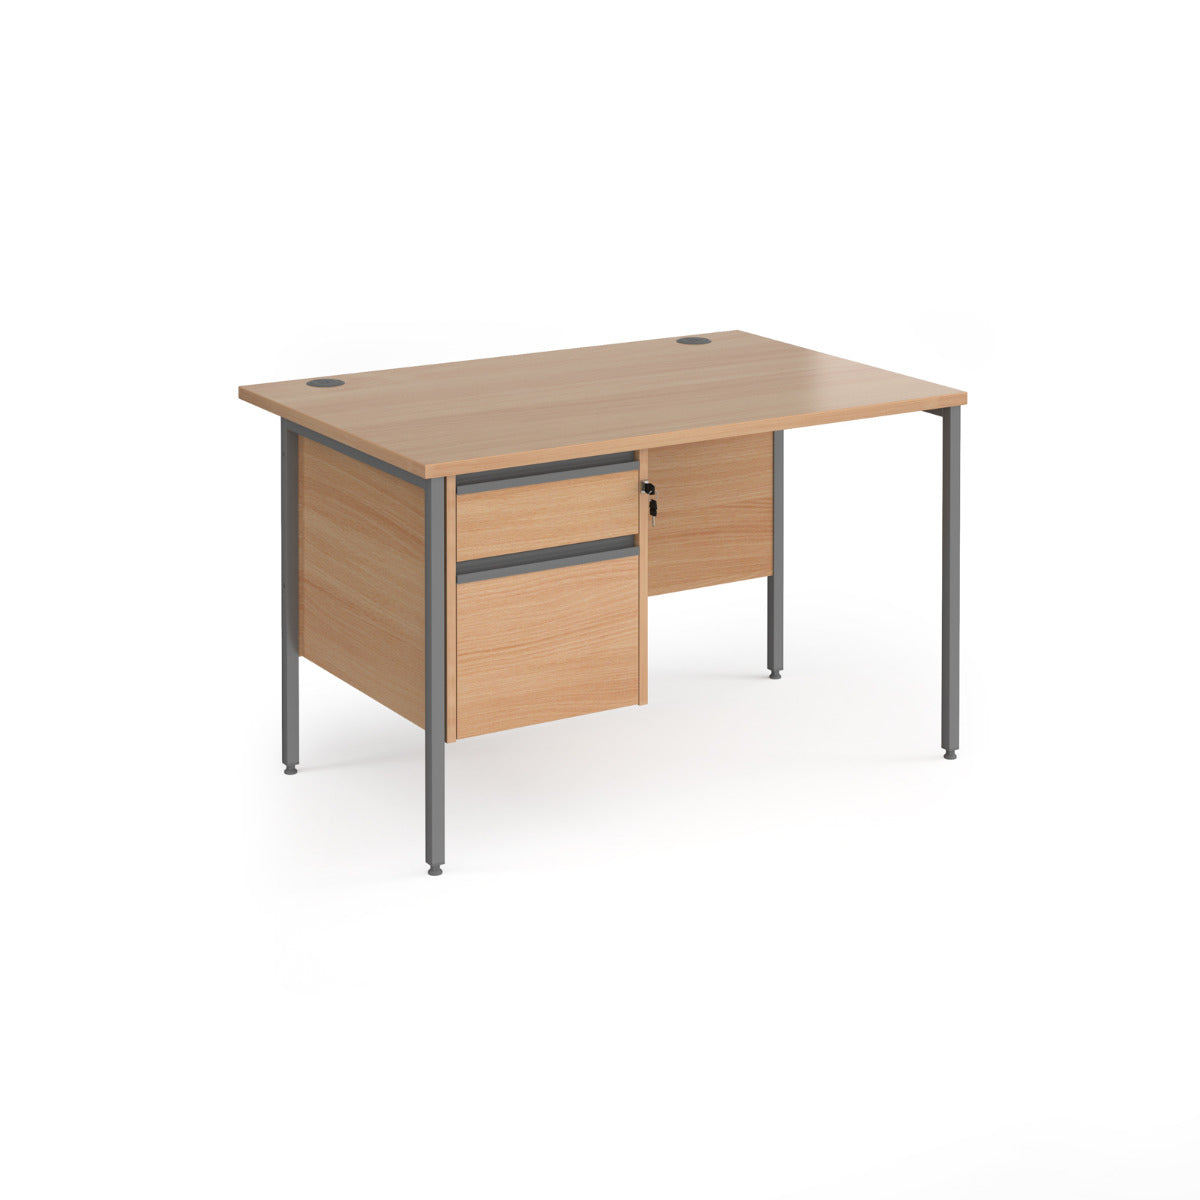 Contract H Frame Straight Office Desk with Two Drawer Storage